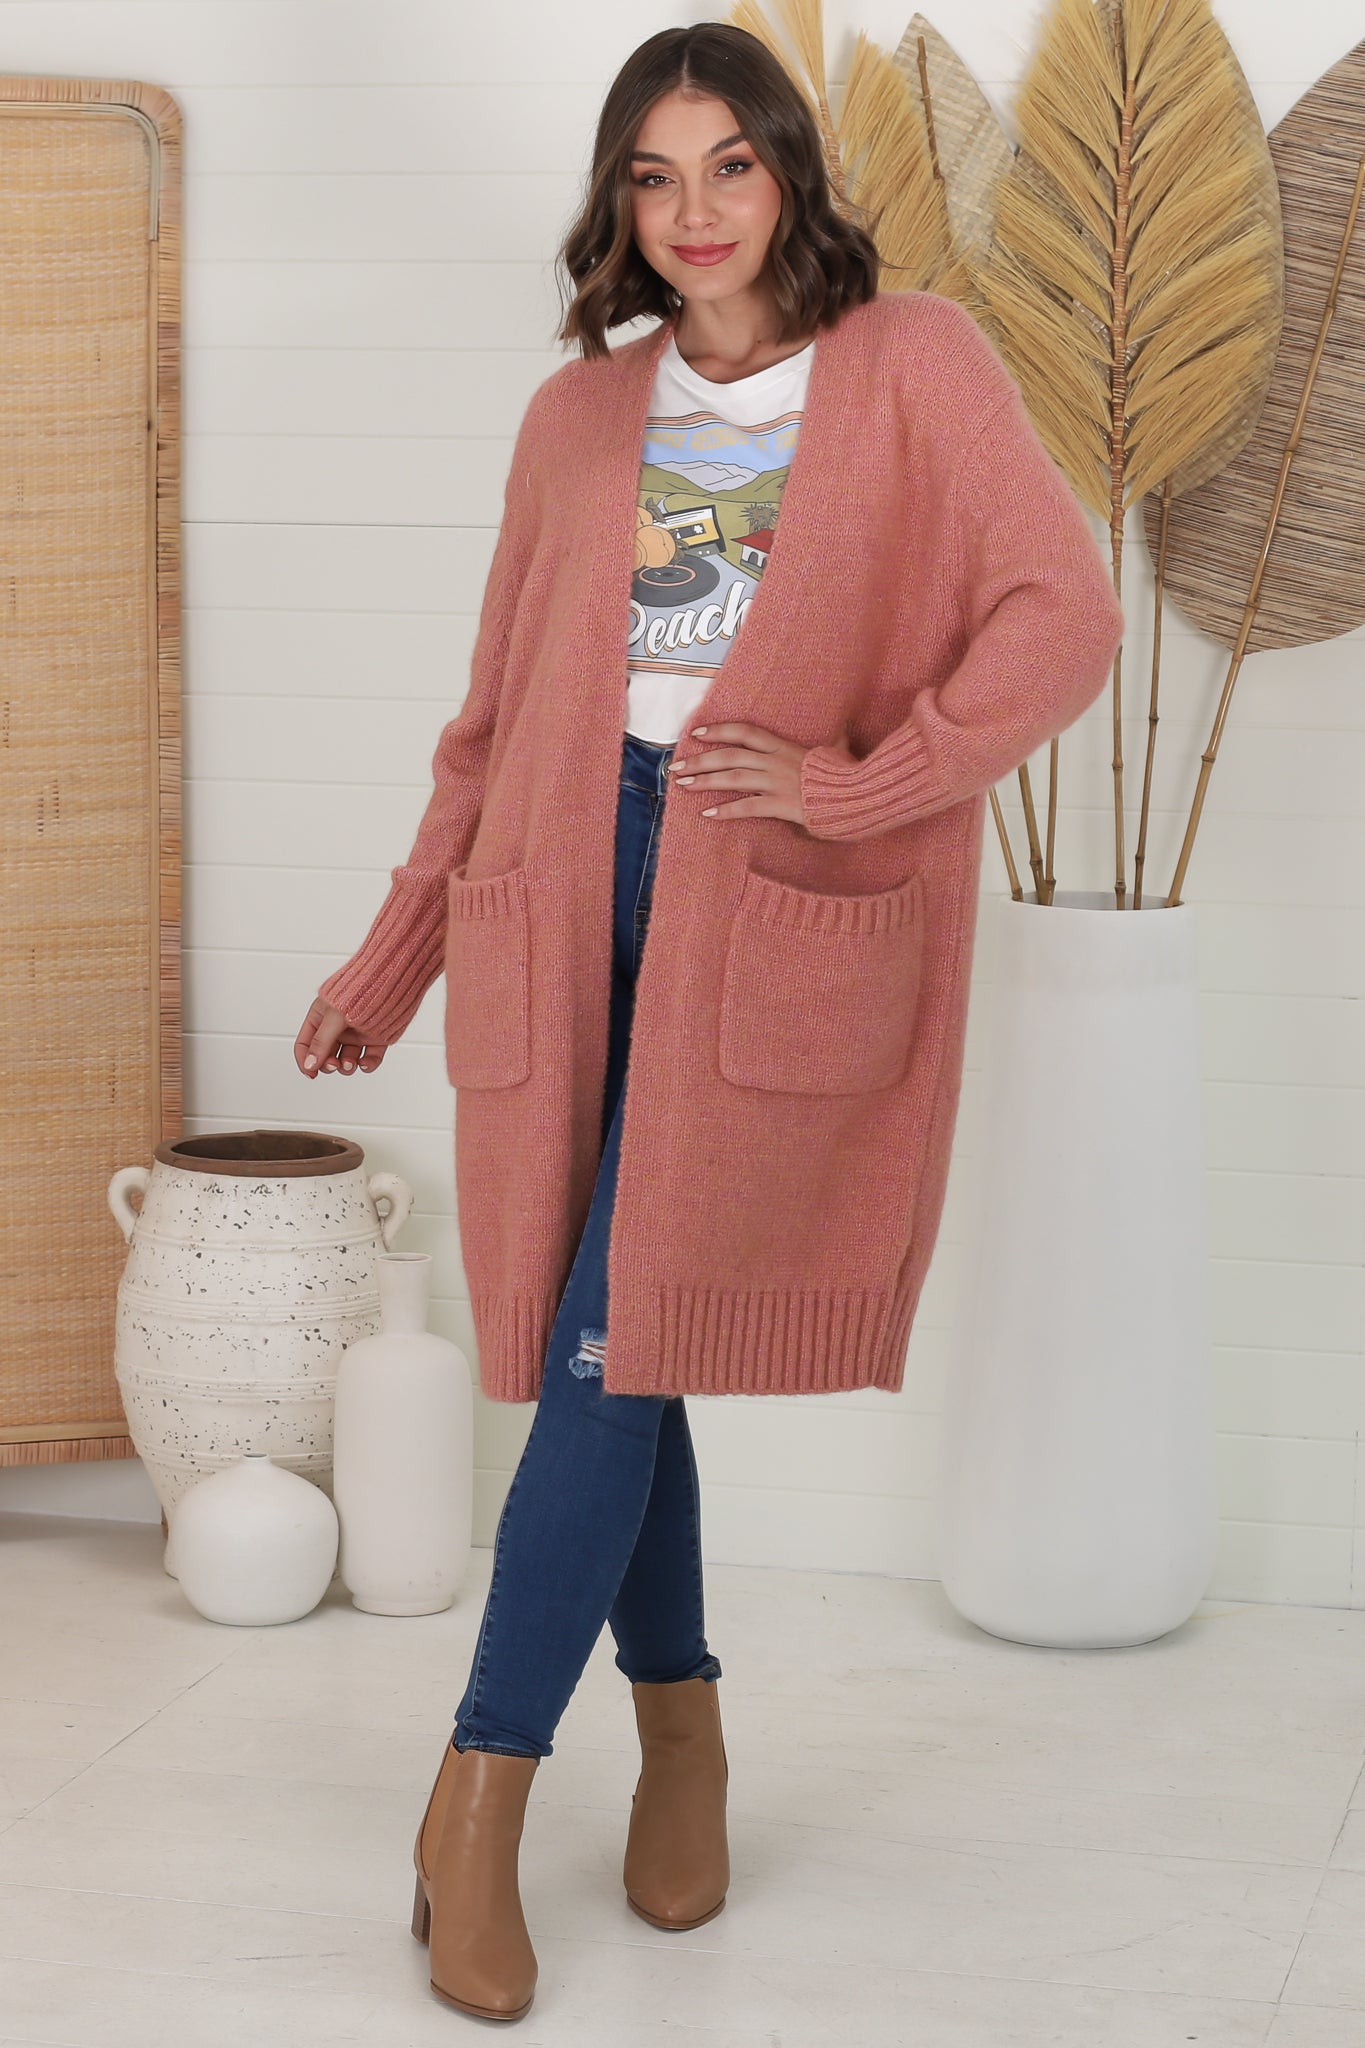 Kartika Cardigan - Long Ribbed Cuff and Hem Cardigan with Pockets in Dusty Rose